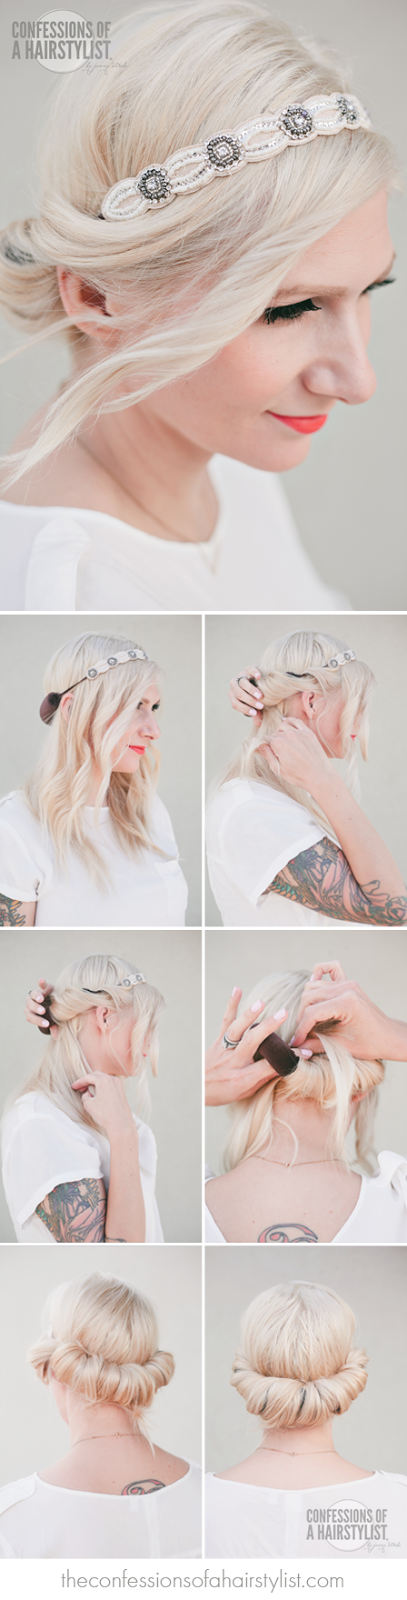 The Hollywood Roll Tutorial — Confessions of a Hairstylist